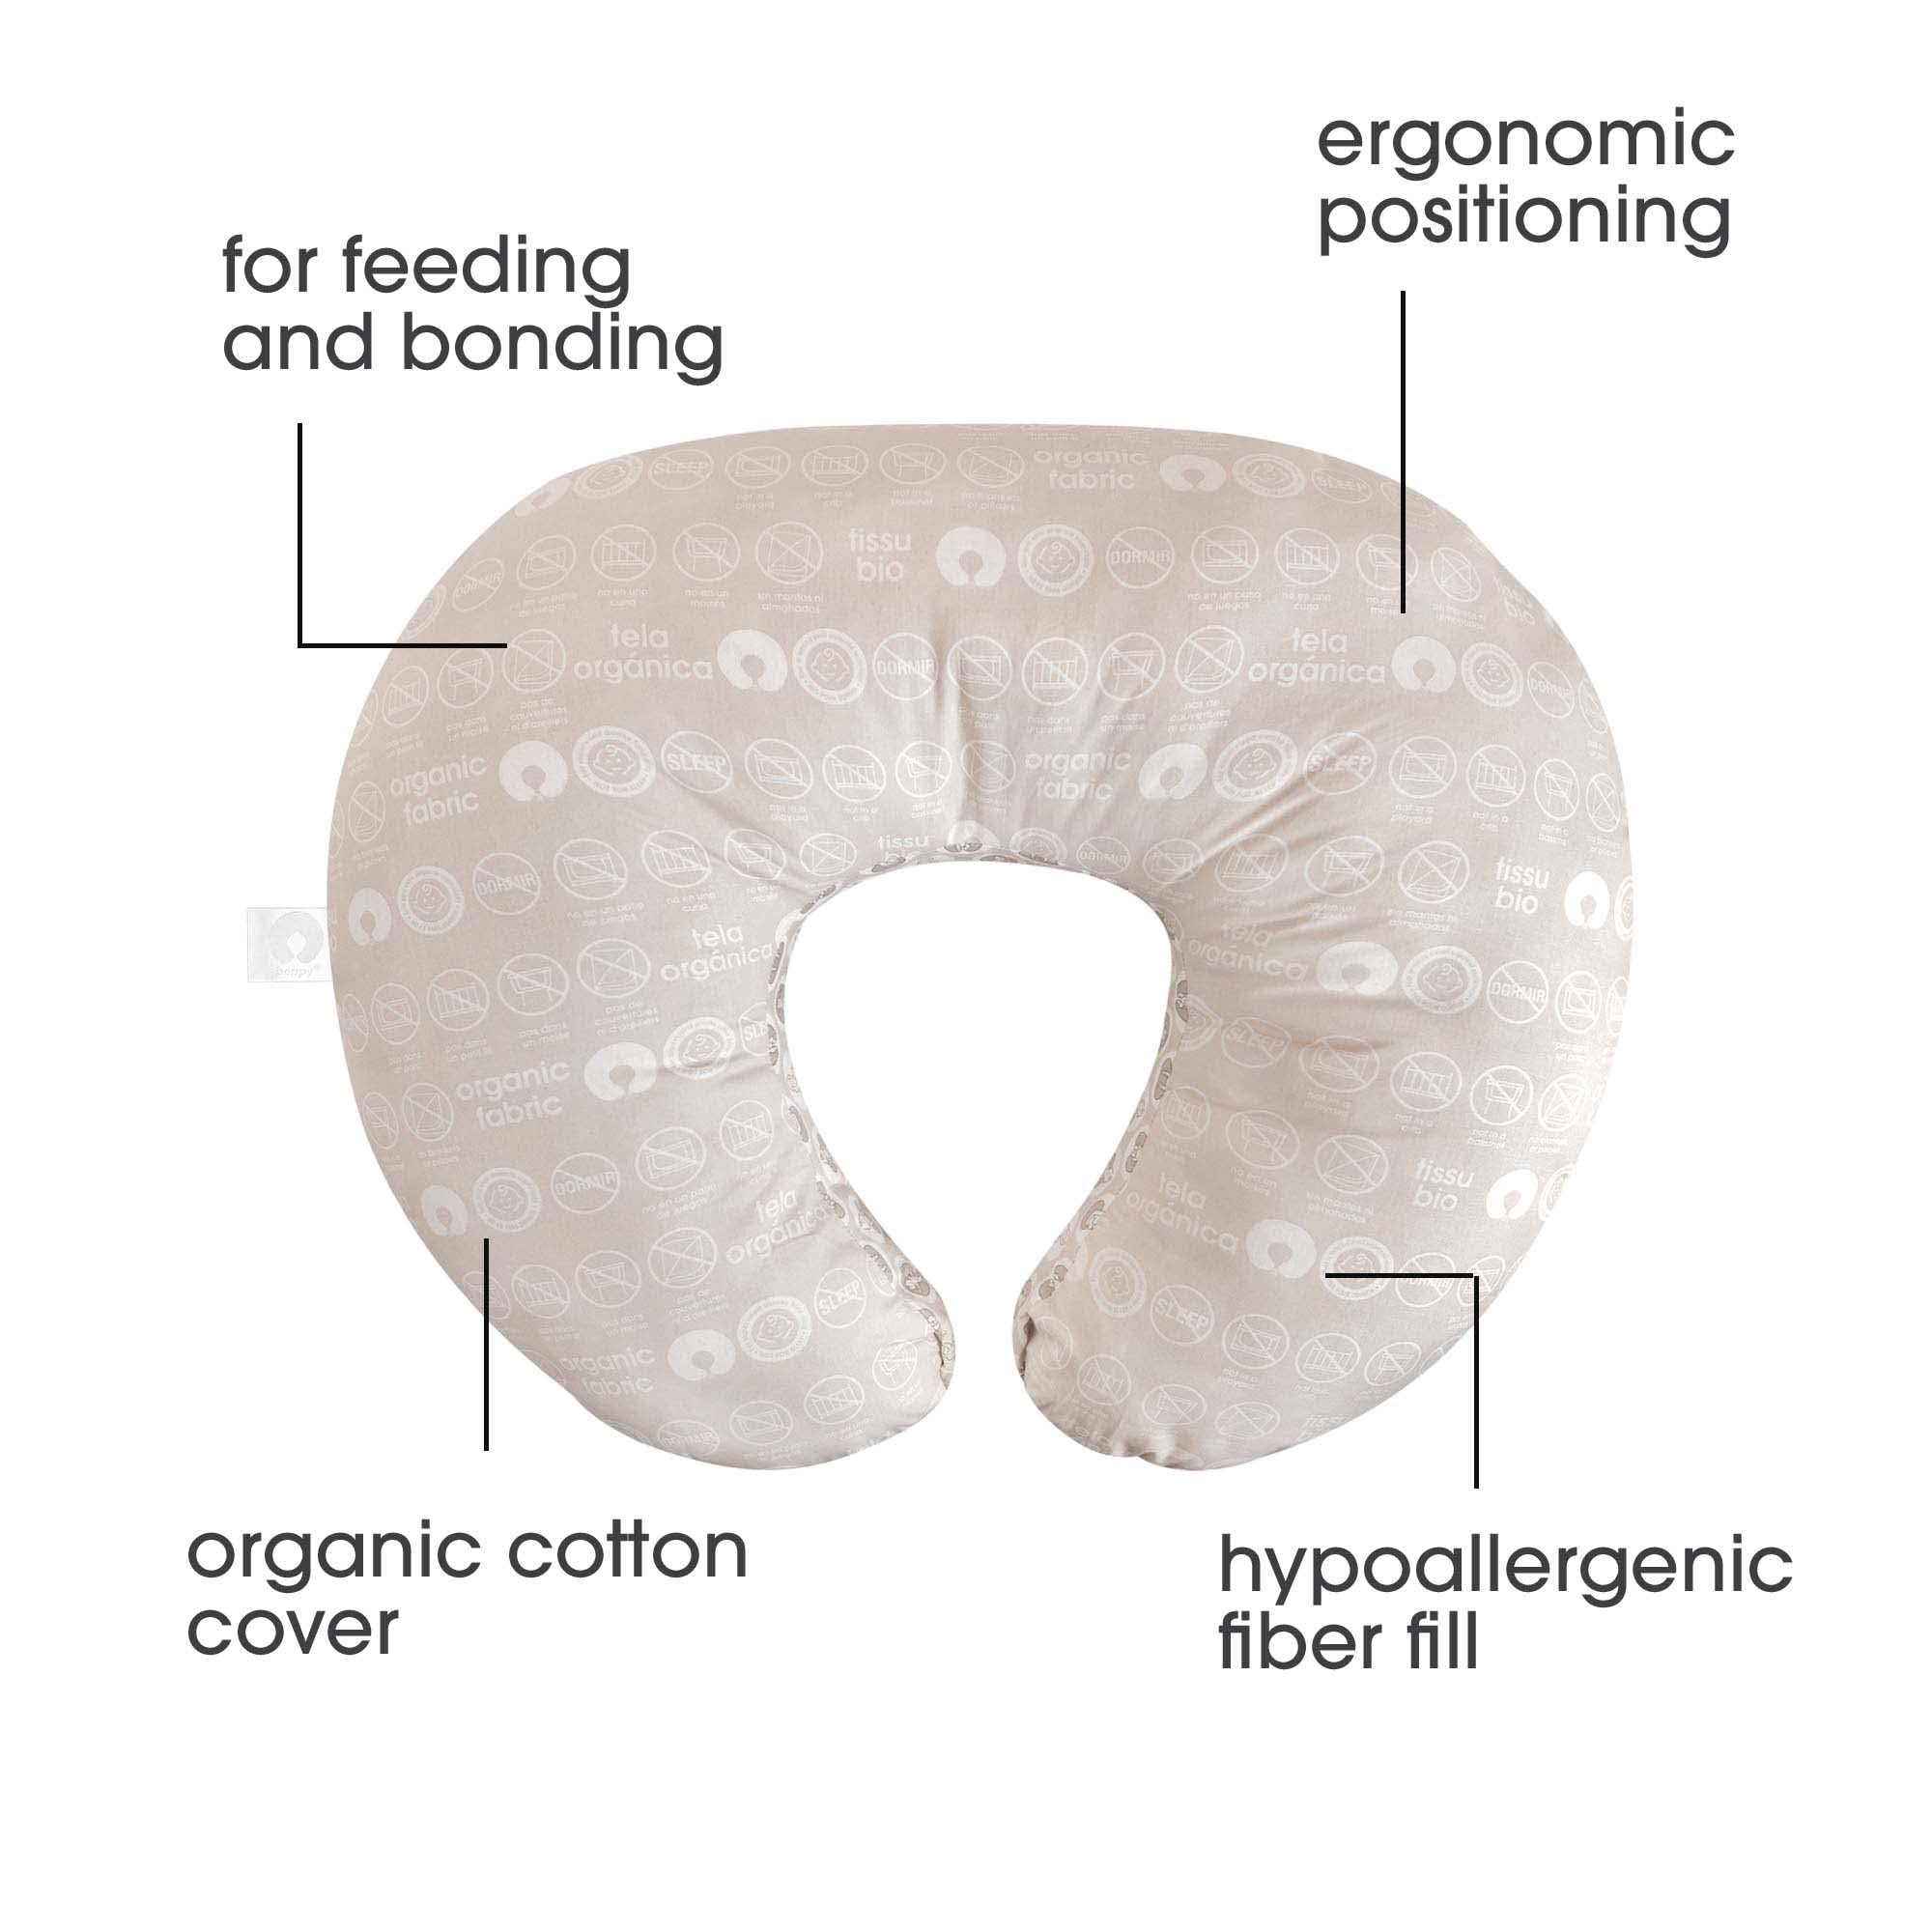 Boppy Nursing Pillow Organic Bare Naked Original Support, Boppy Pillow Only, Nursing Pillow Cover Sold Separately, Nursing Essentials for Bottle and Breastfeeding, with 100% Organic Cotton Fabric